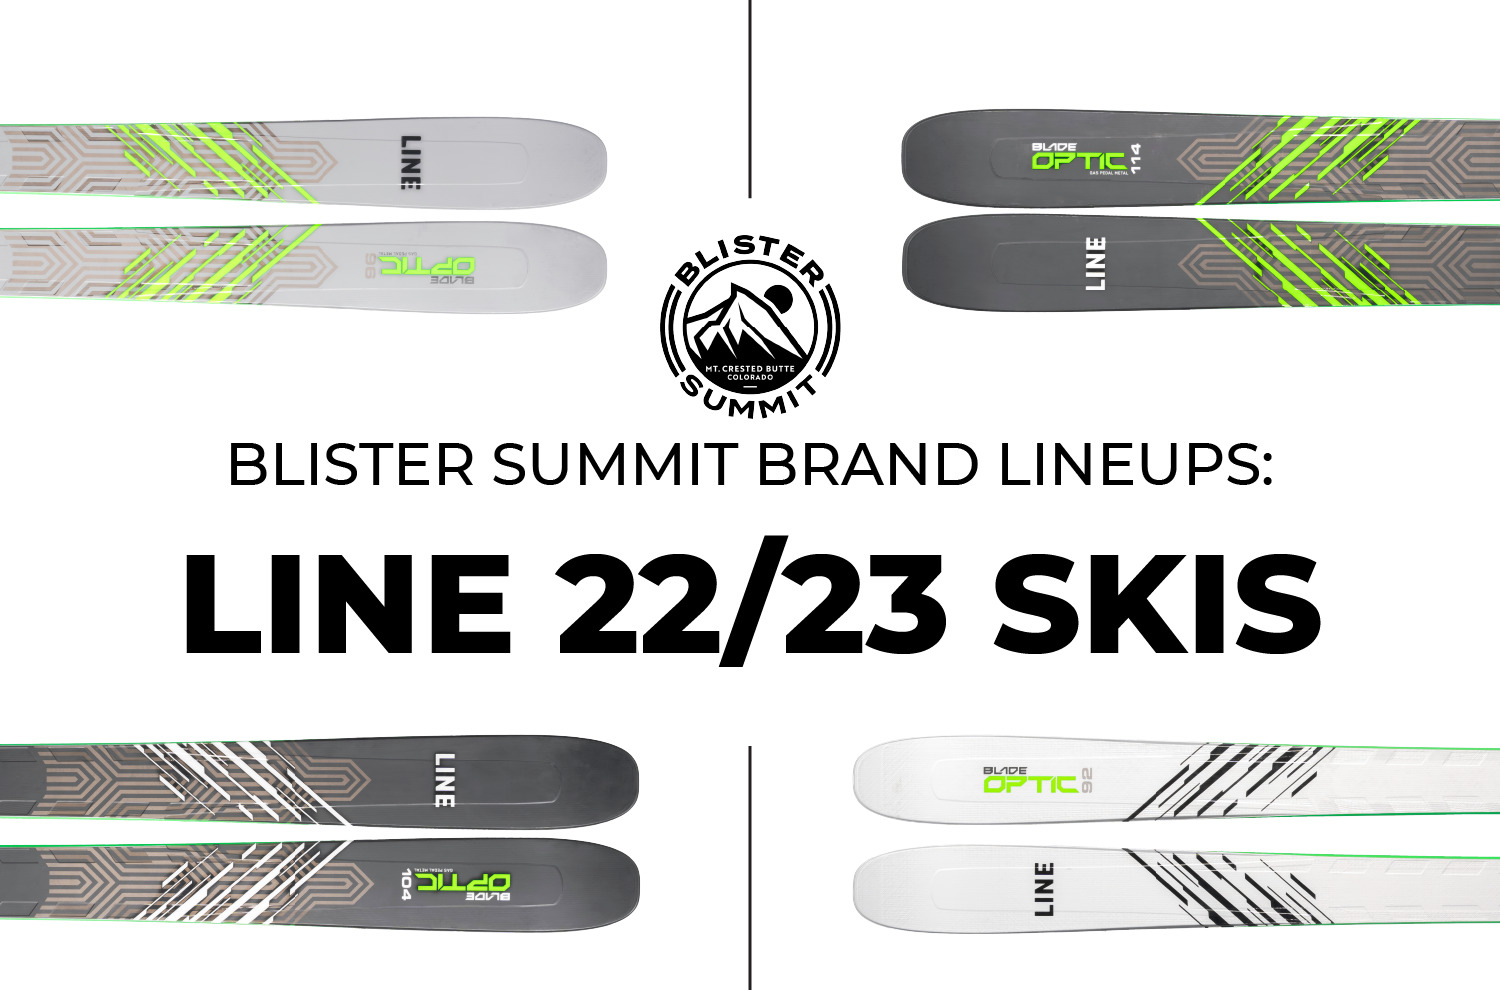 On Blister, We talk with Line’s marketing manager, Connor Clayton, about Line’s new collection of metal-laminate freeride skis, the Blade Optics. We discuss the origin of the series, how it combines elements of the Line Blade and Line Vision skis, Line’s “Gas Pedal Metal” construction, and the four Blade Optic models.